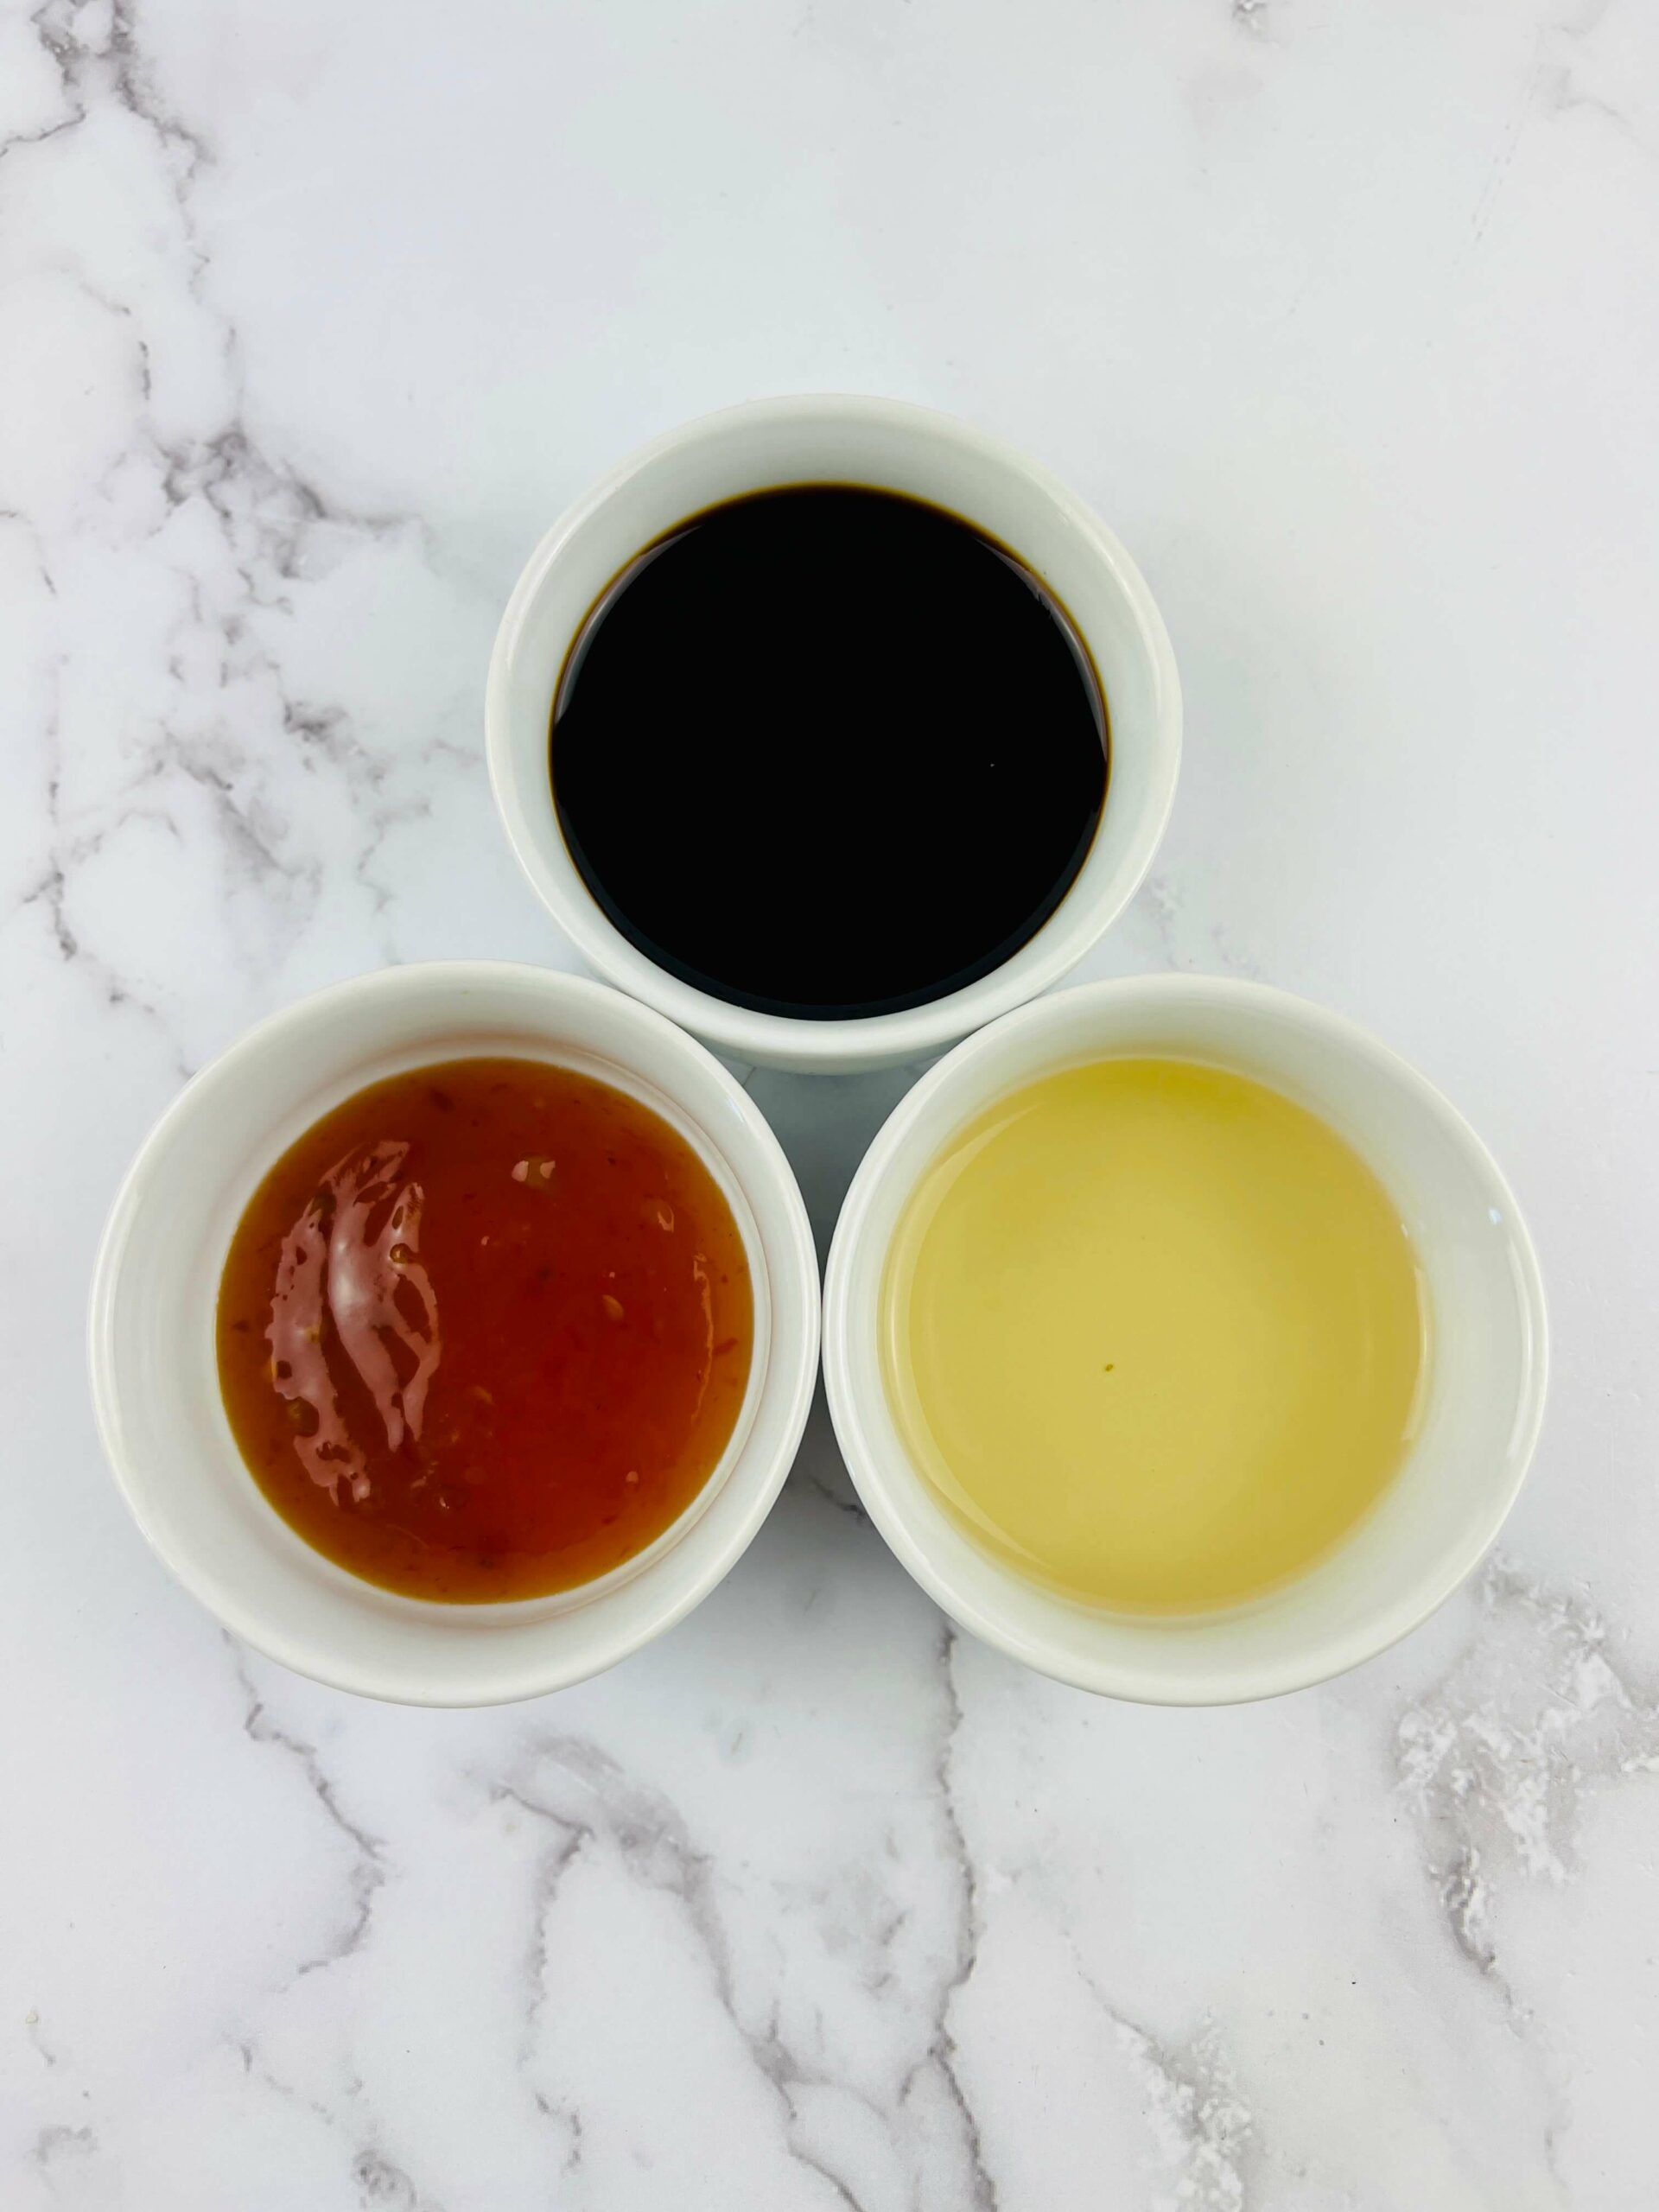 Soy sauce and oil and chili sauce.